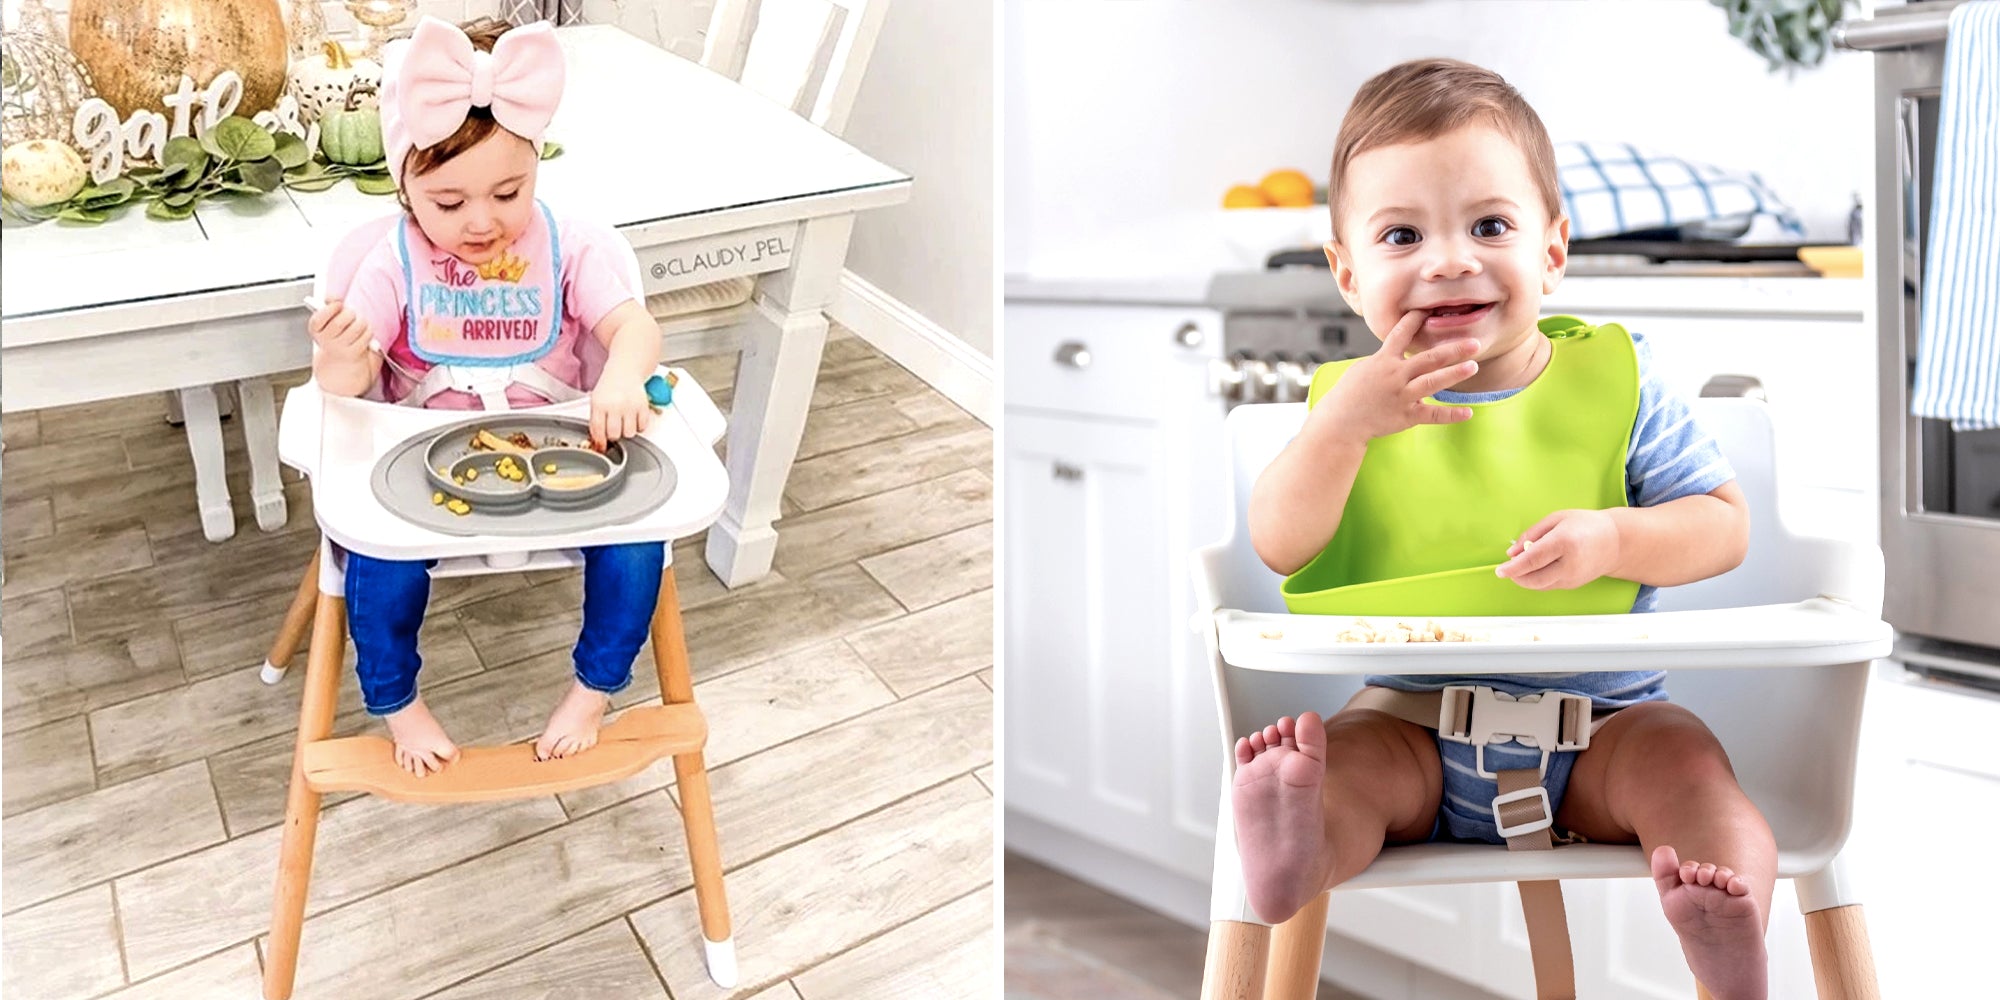 High Chair | Baby Hight Chair with for Baby/Infants/Toddlers 3-in-1 Wooden High Chair Grey Pink Wooden